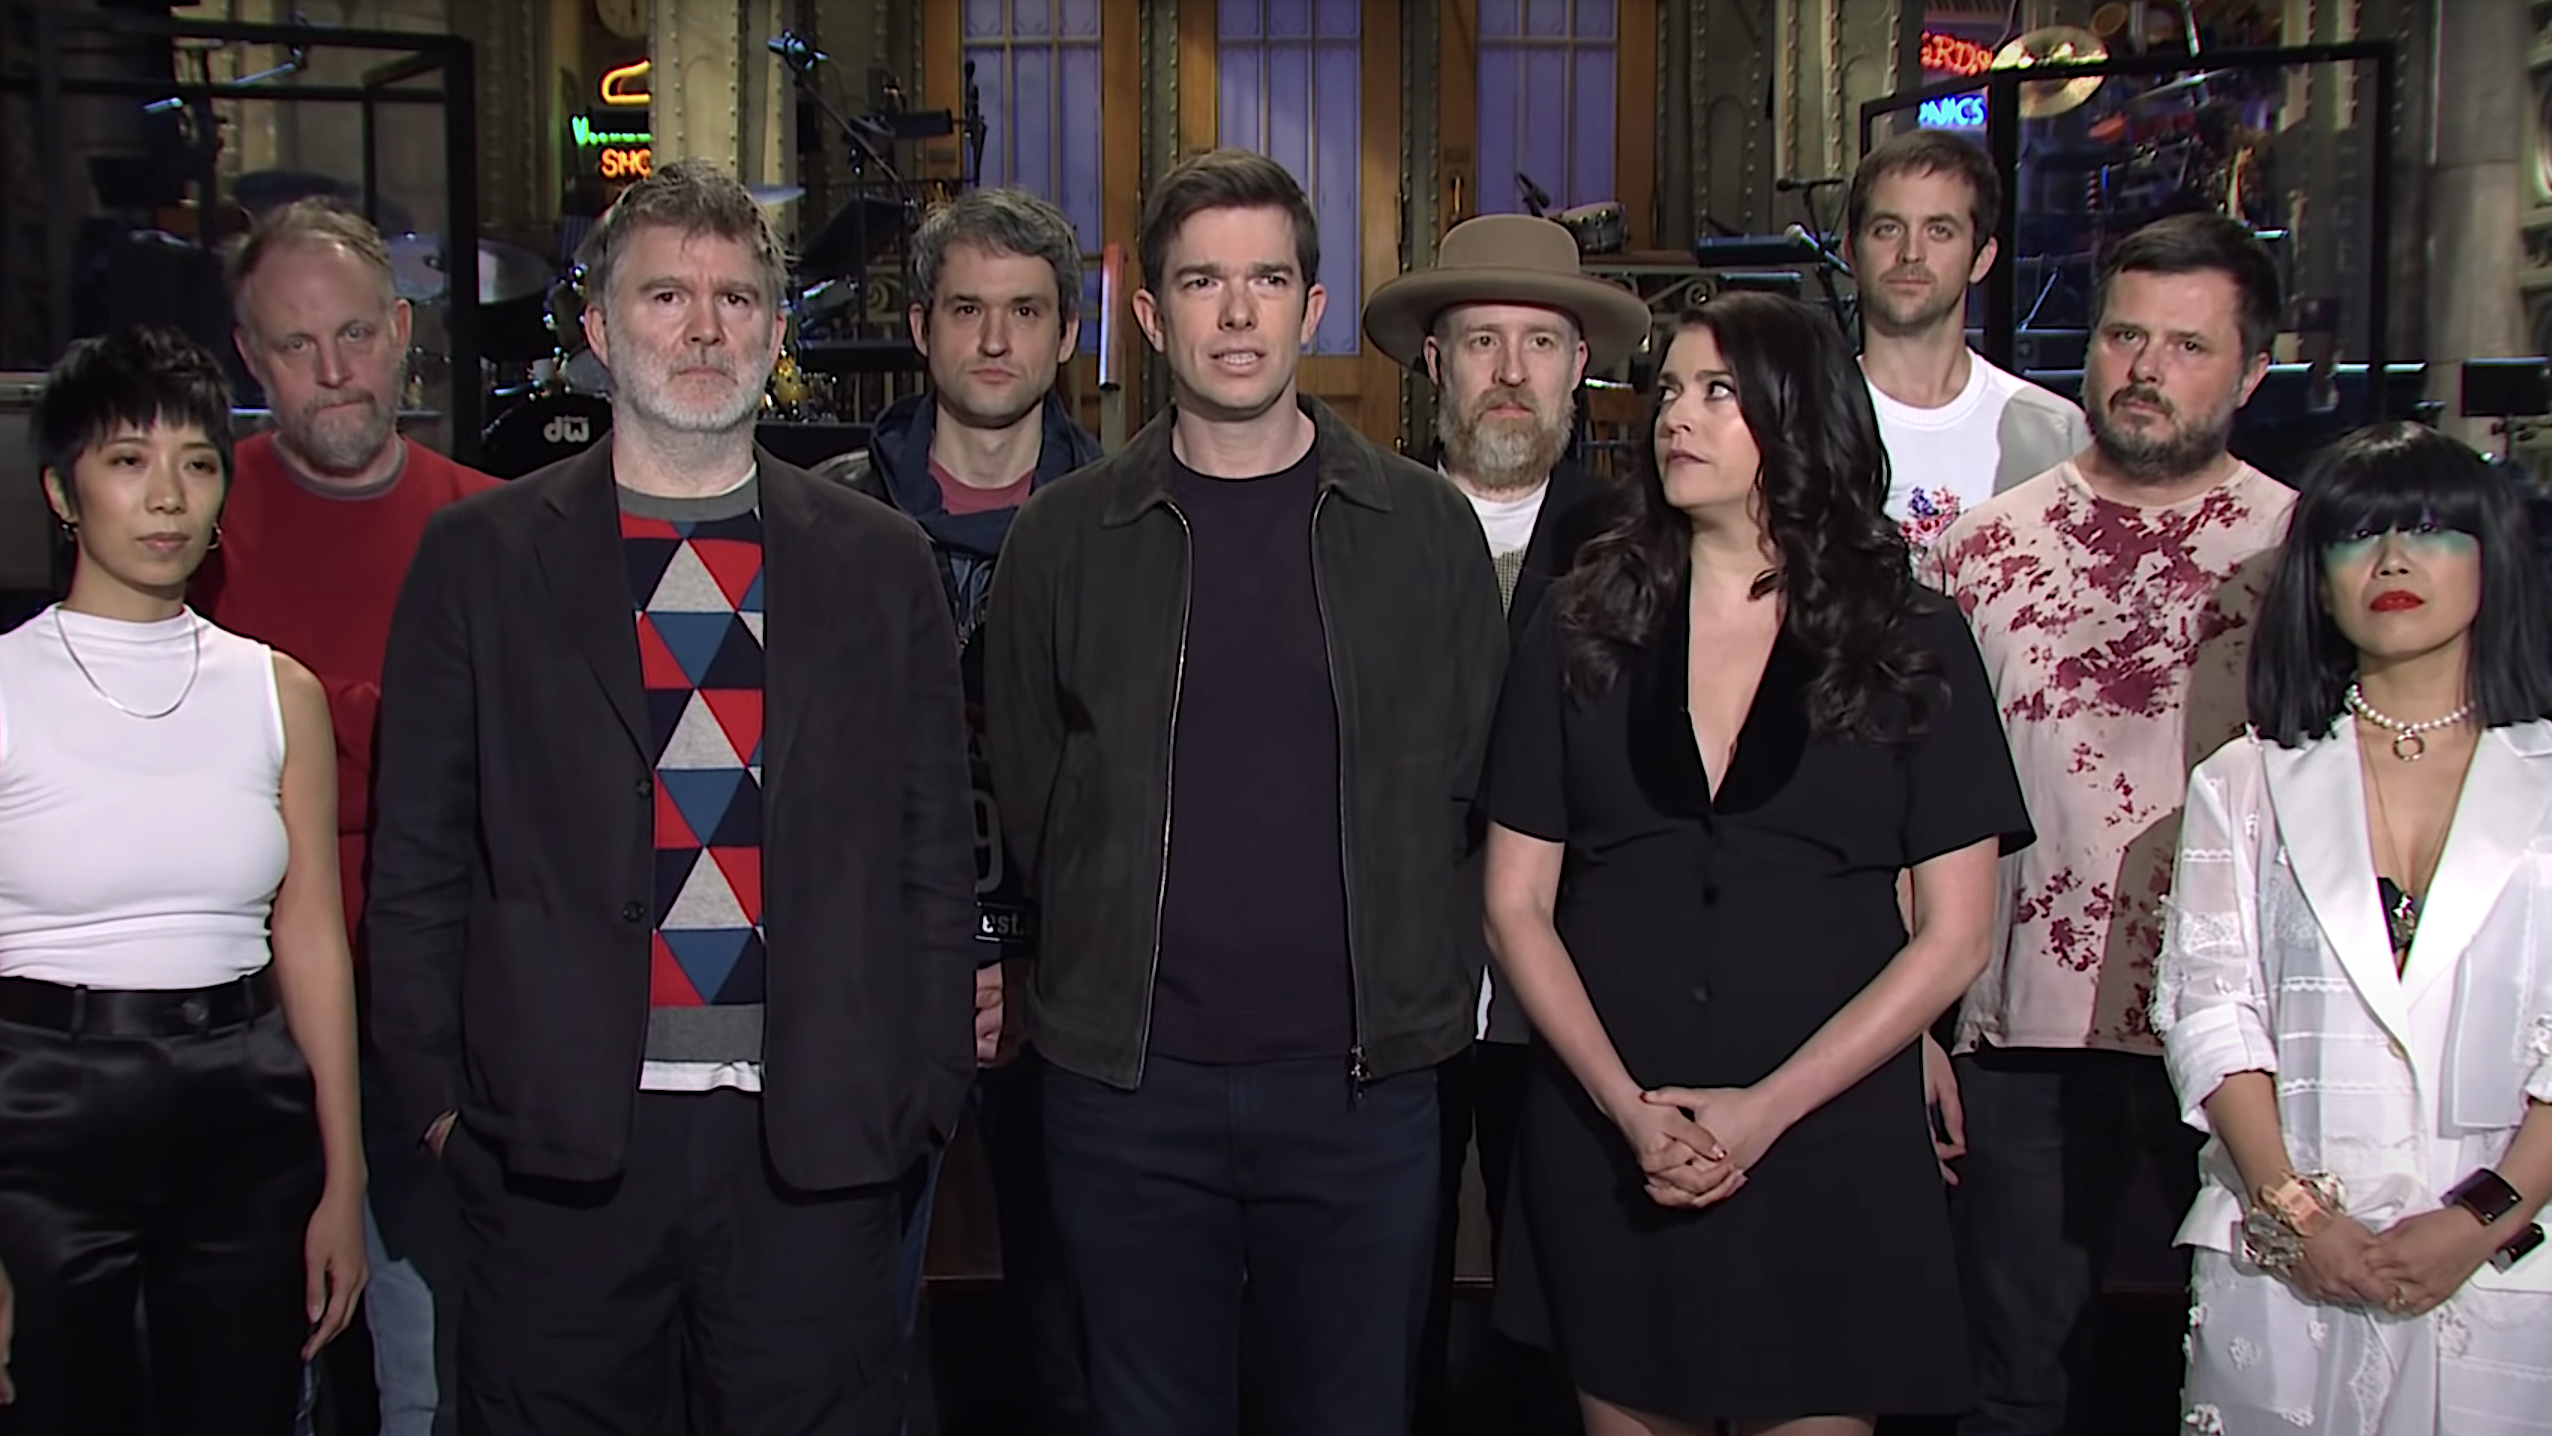 John Mulaney prepares for SNL with a Five-Timers Club-worthy storm-off